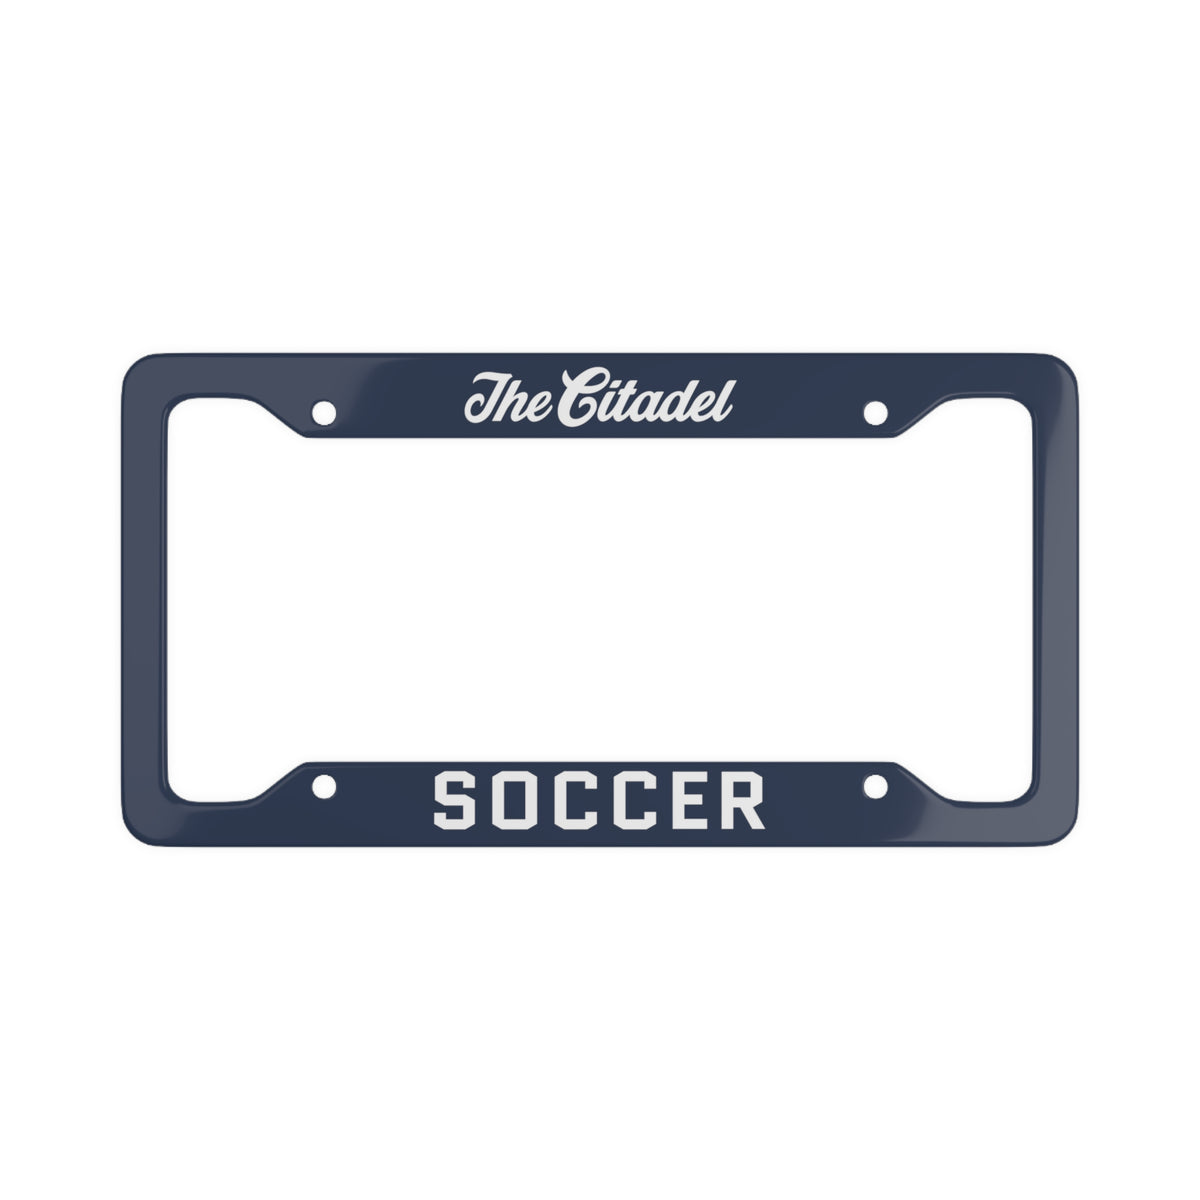 The Citadel Word Mark, Club Sports Soccer, License Plate Frame